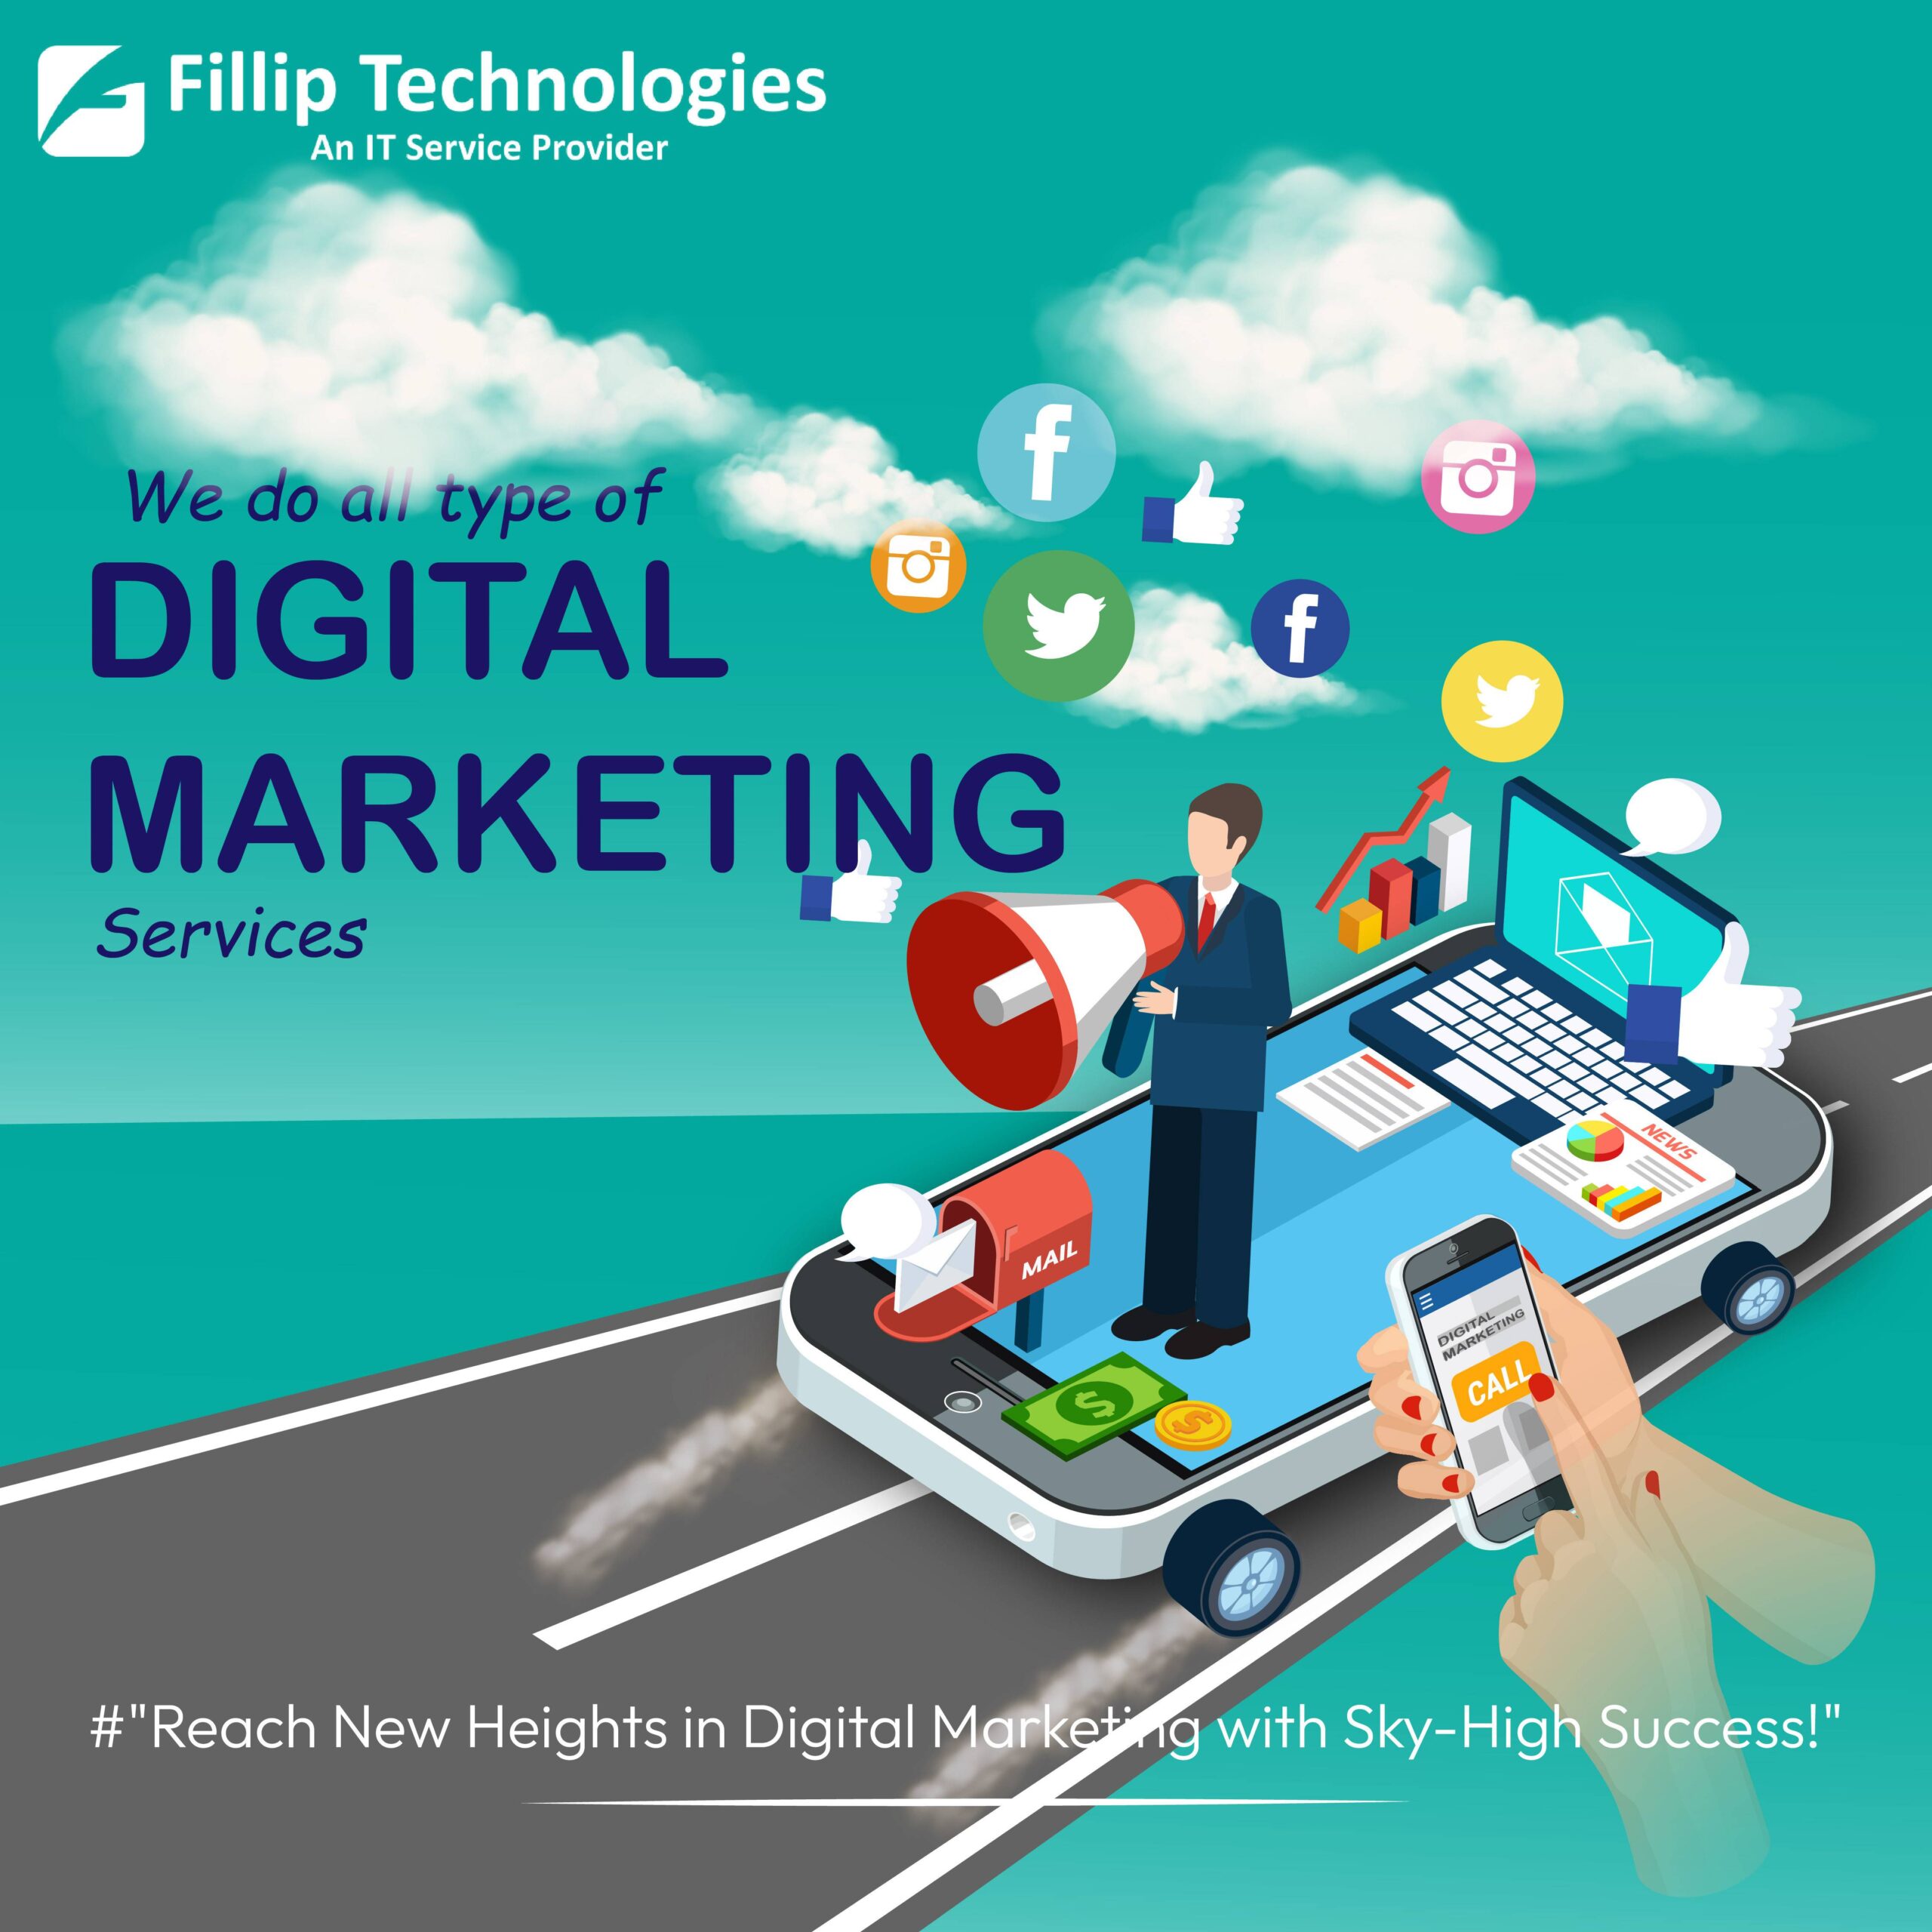 Digital marketing agency near me. By Fillip technologies with best service providers